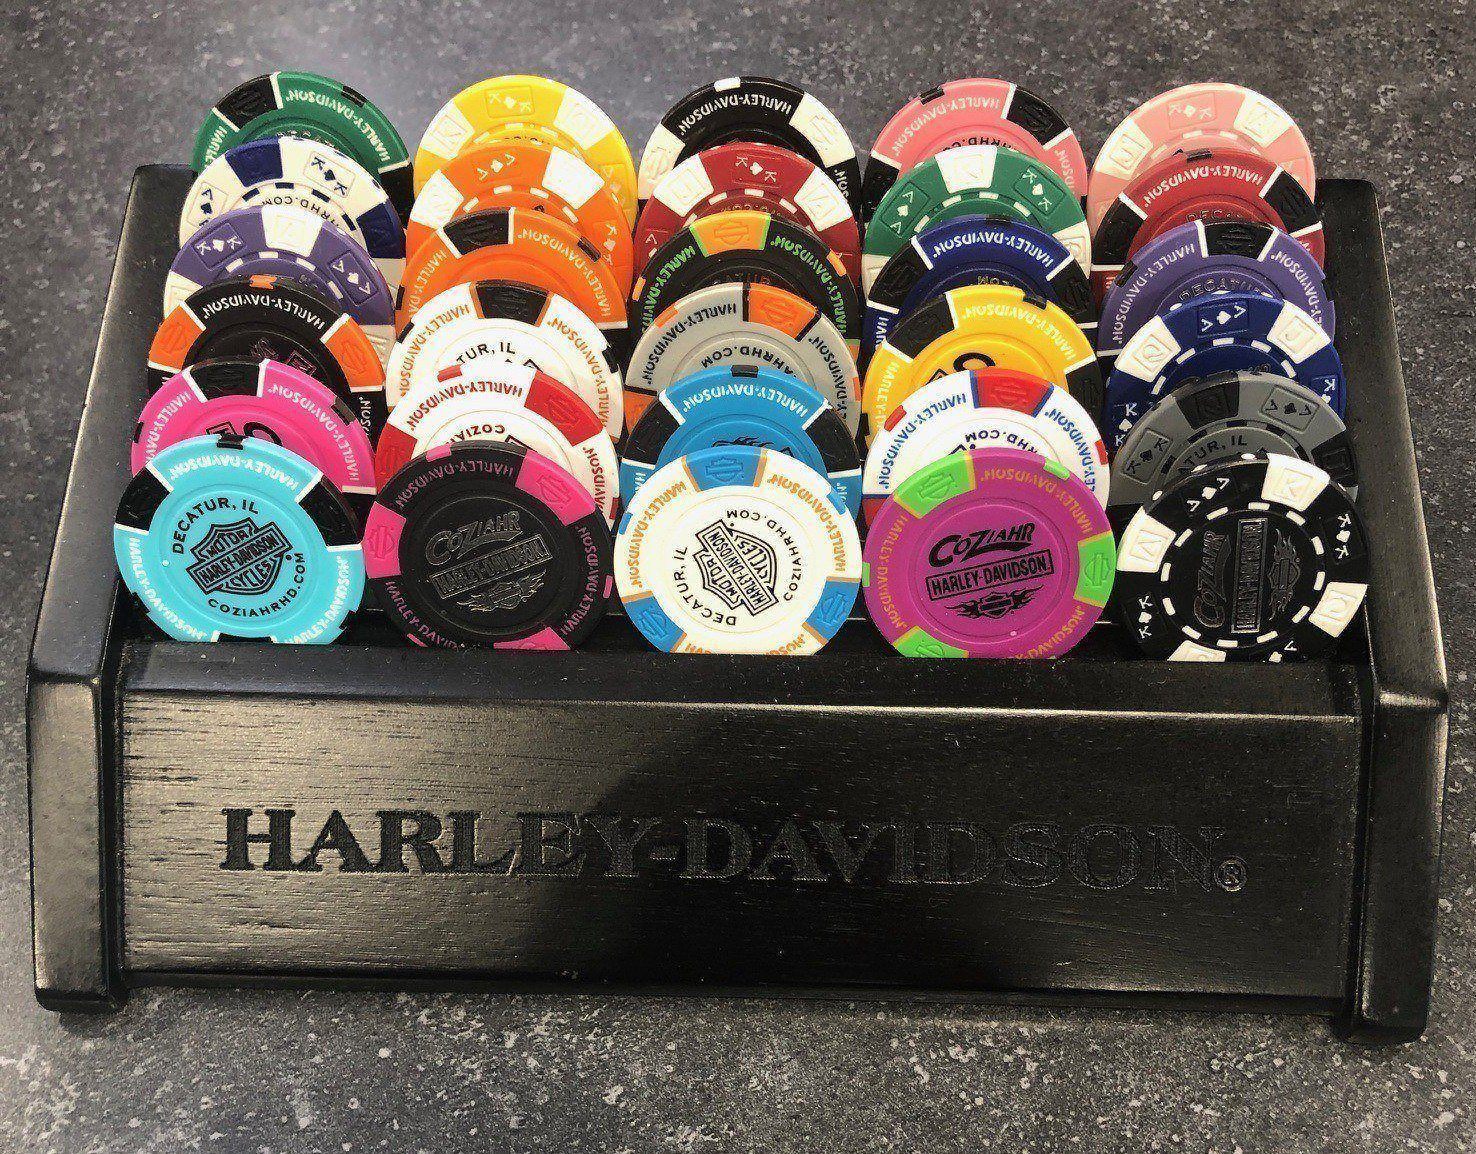 Coziahr Harley-Davidson poker chips, assorted colors